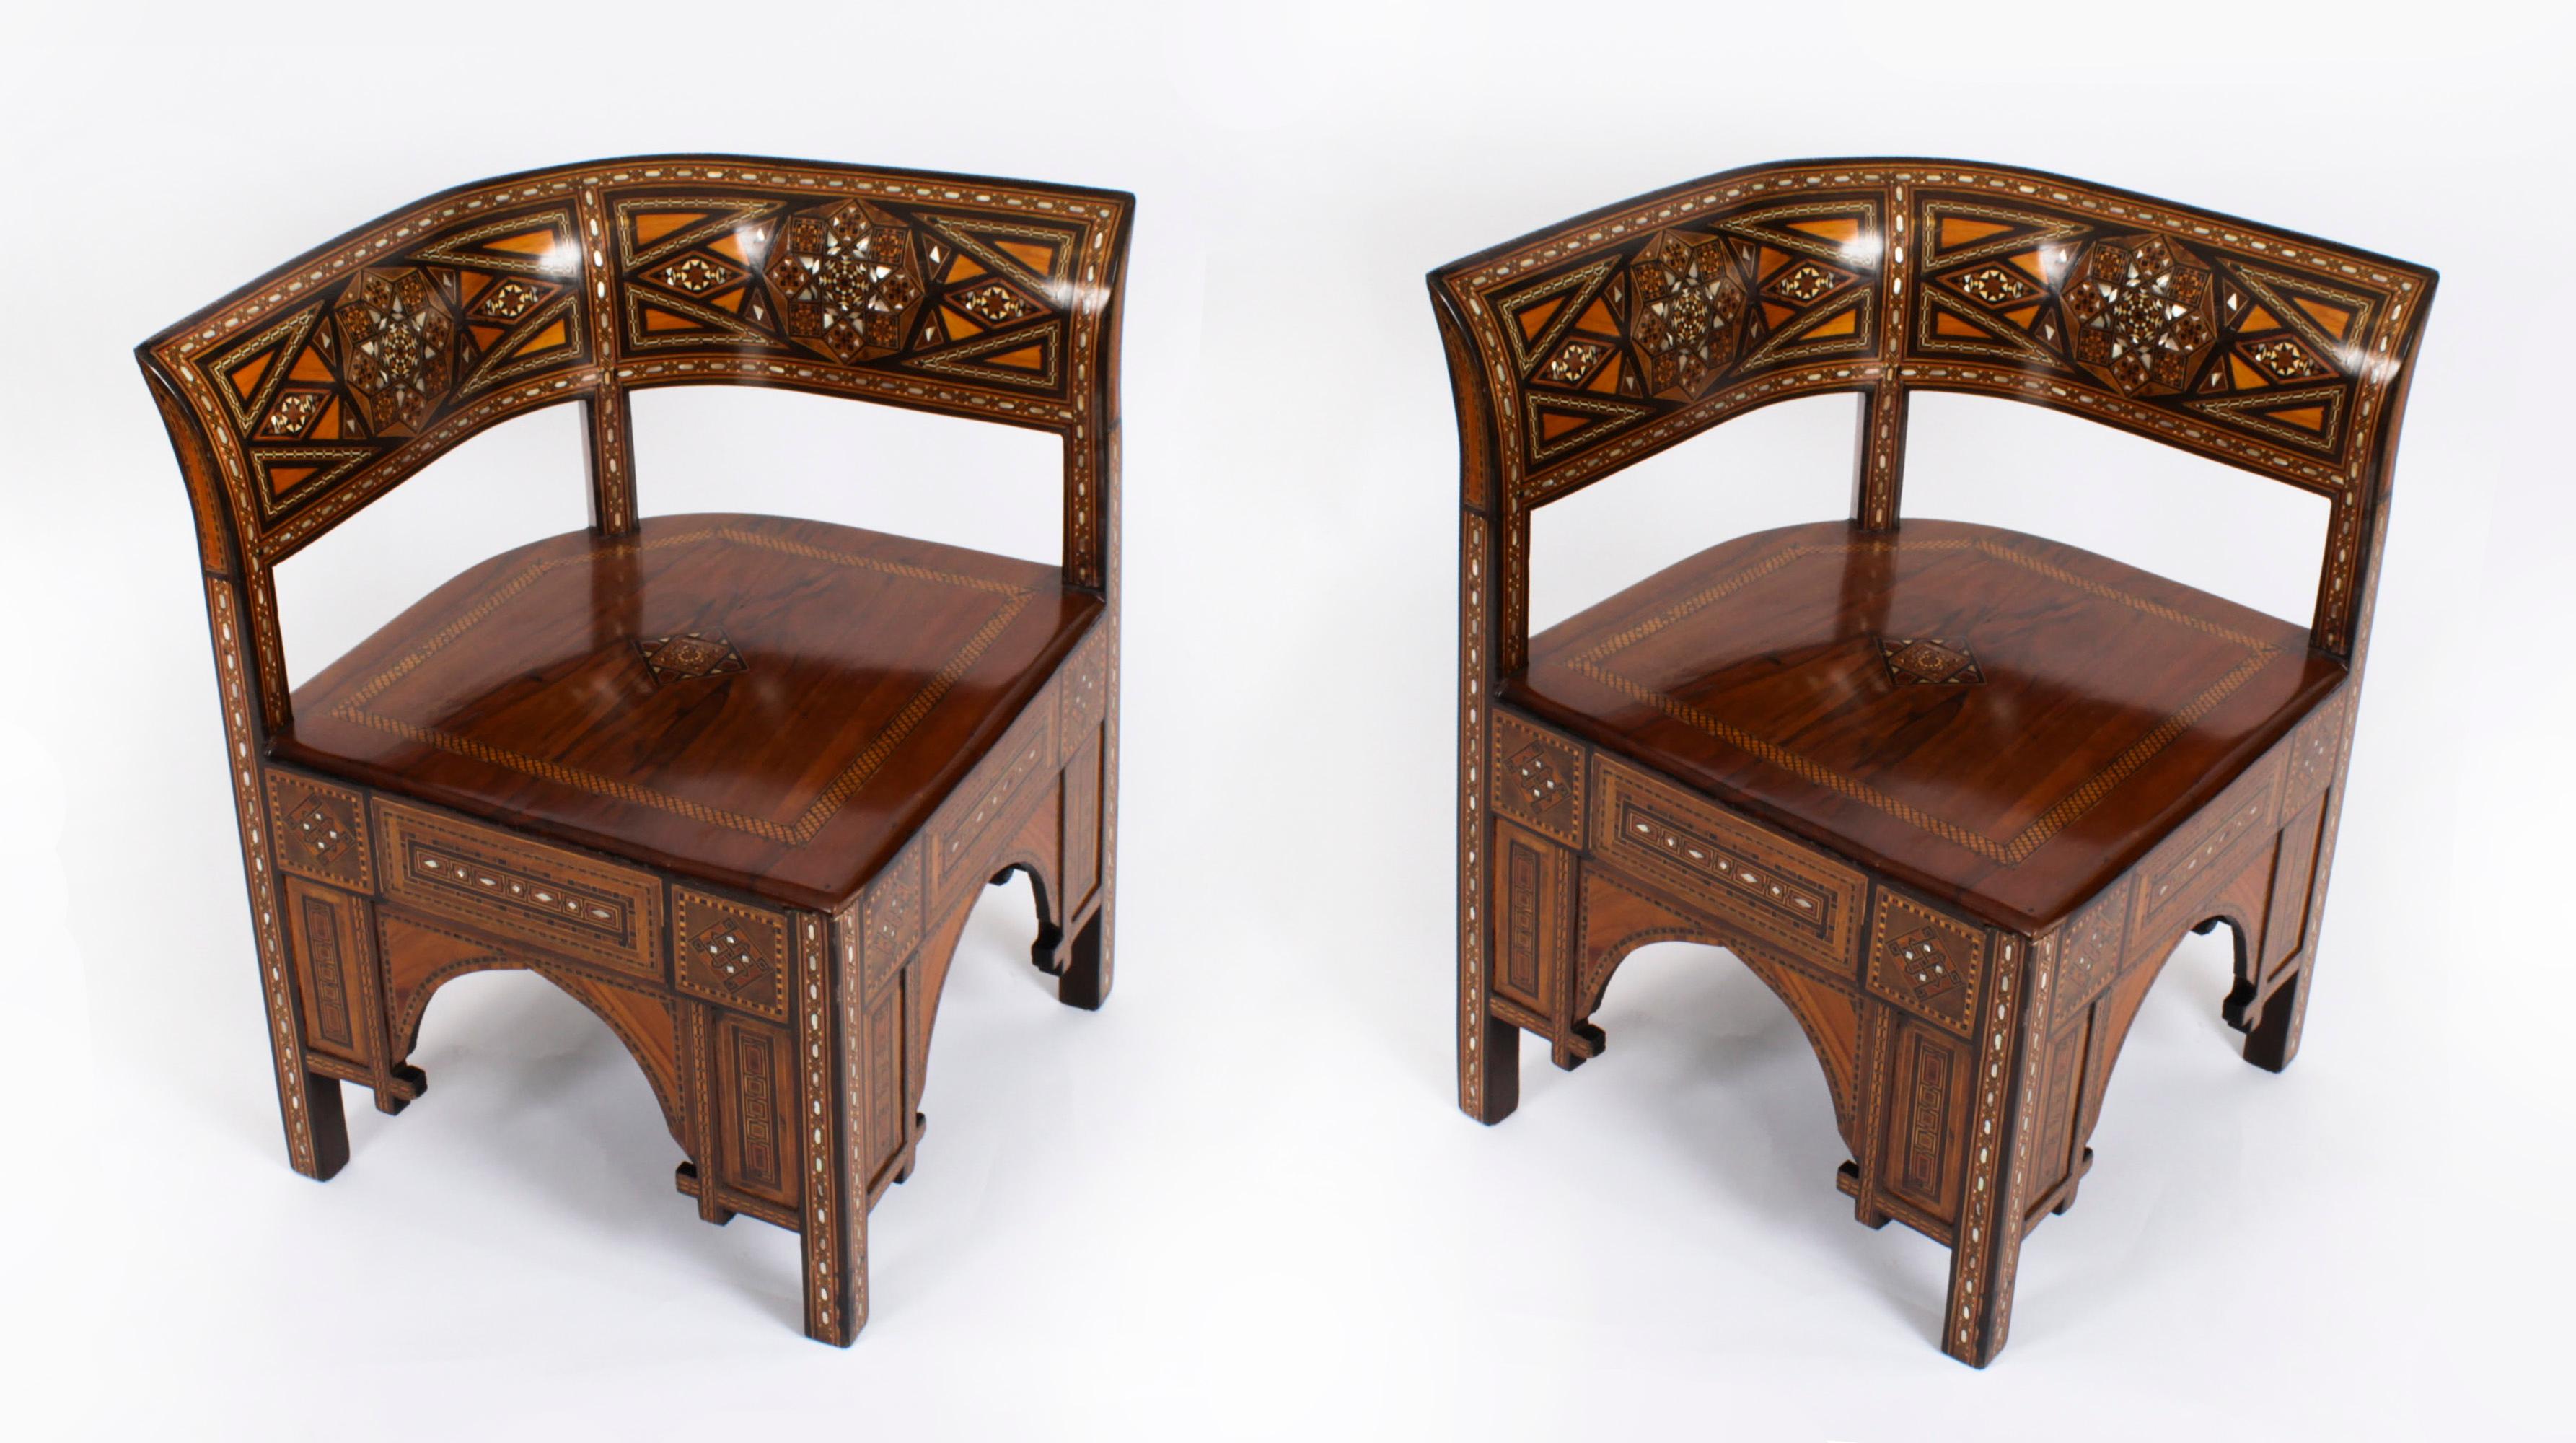 Antique Pair of Syrian Parquetry Inlaid Armchairs C1900 For Sale 14